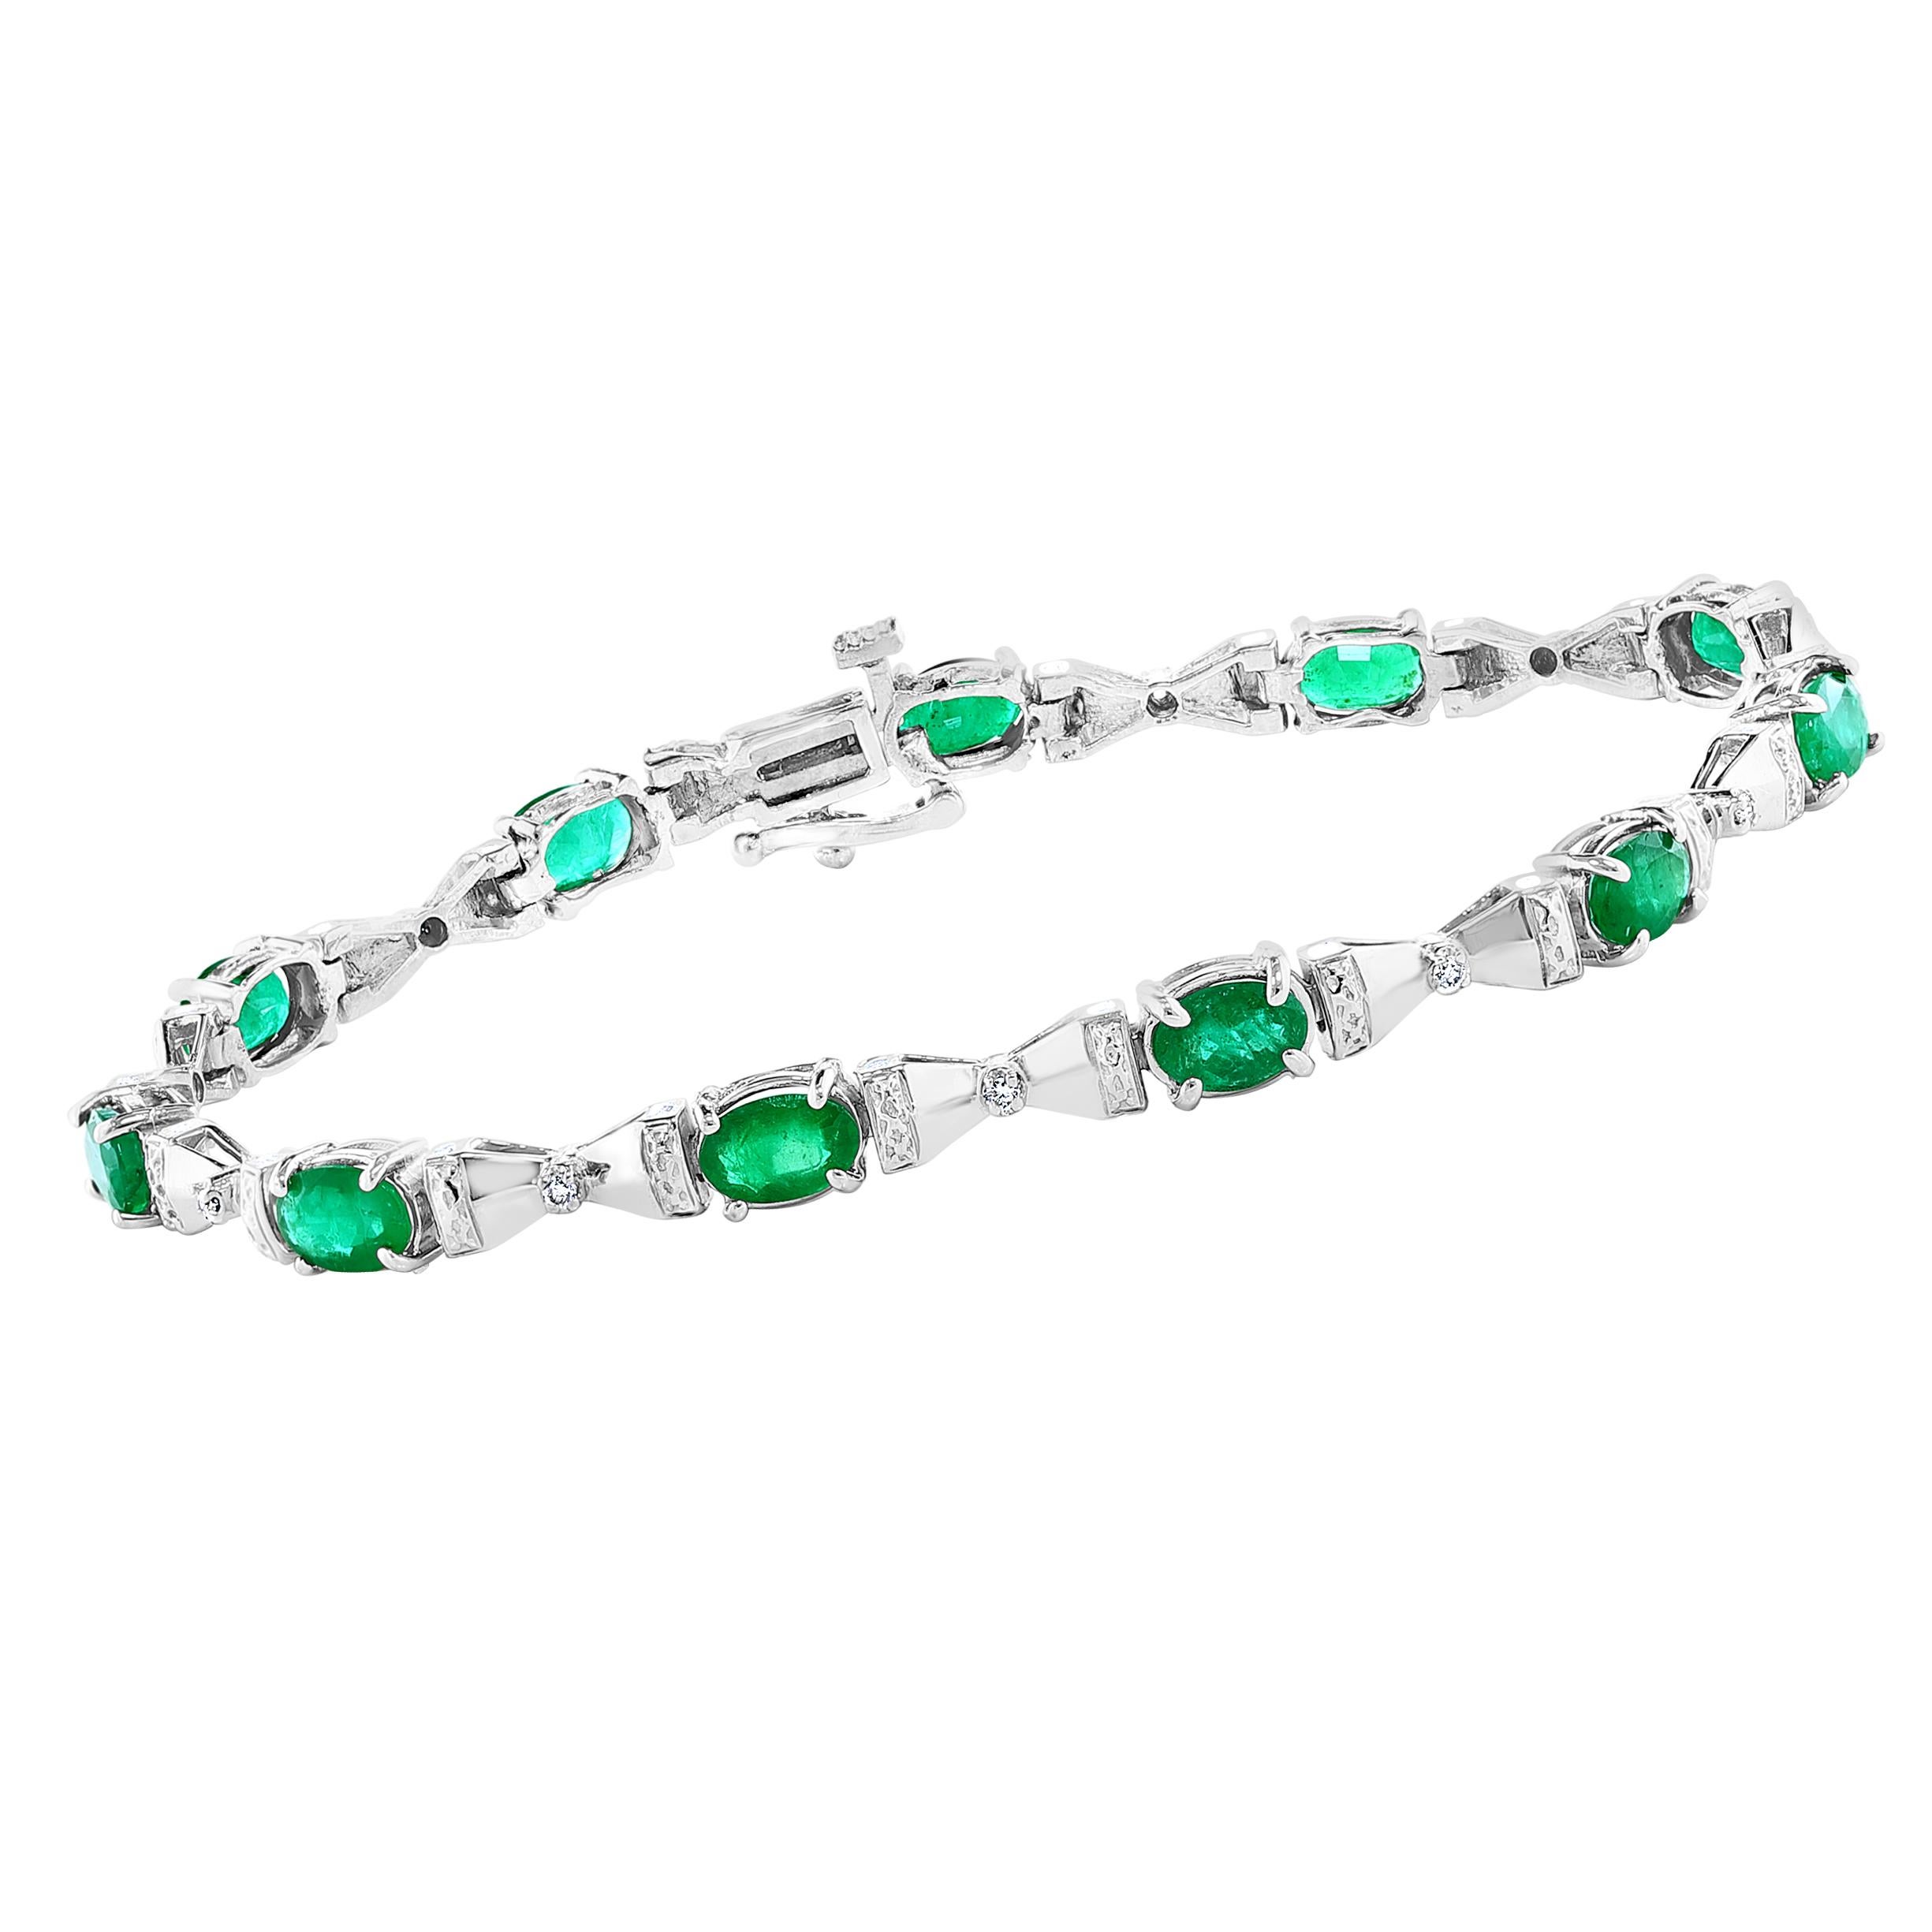 9 Carat Natural Emerald &  1 ct Diamond Cocktail Tennis Bracelet 14 Karat White Gold
 This exceptionally affordable Tennis  bracelet has  11 stones of oval  Emeralds  .  Total weight of the Emeralds is  approximately 9 carat. 
The bracelet is